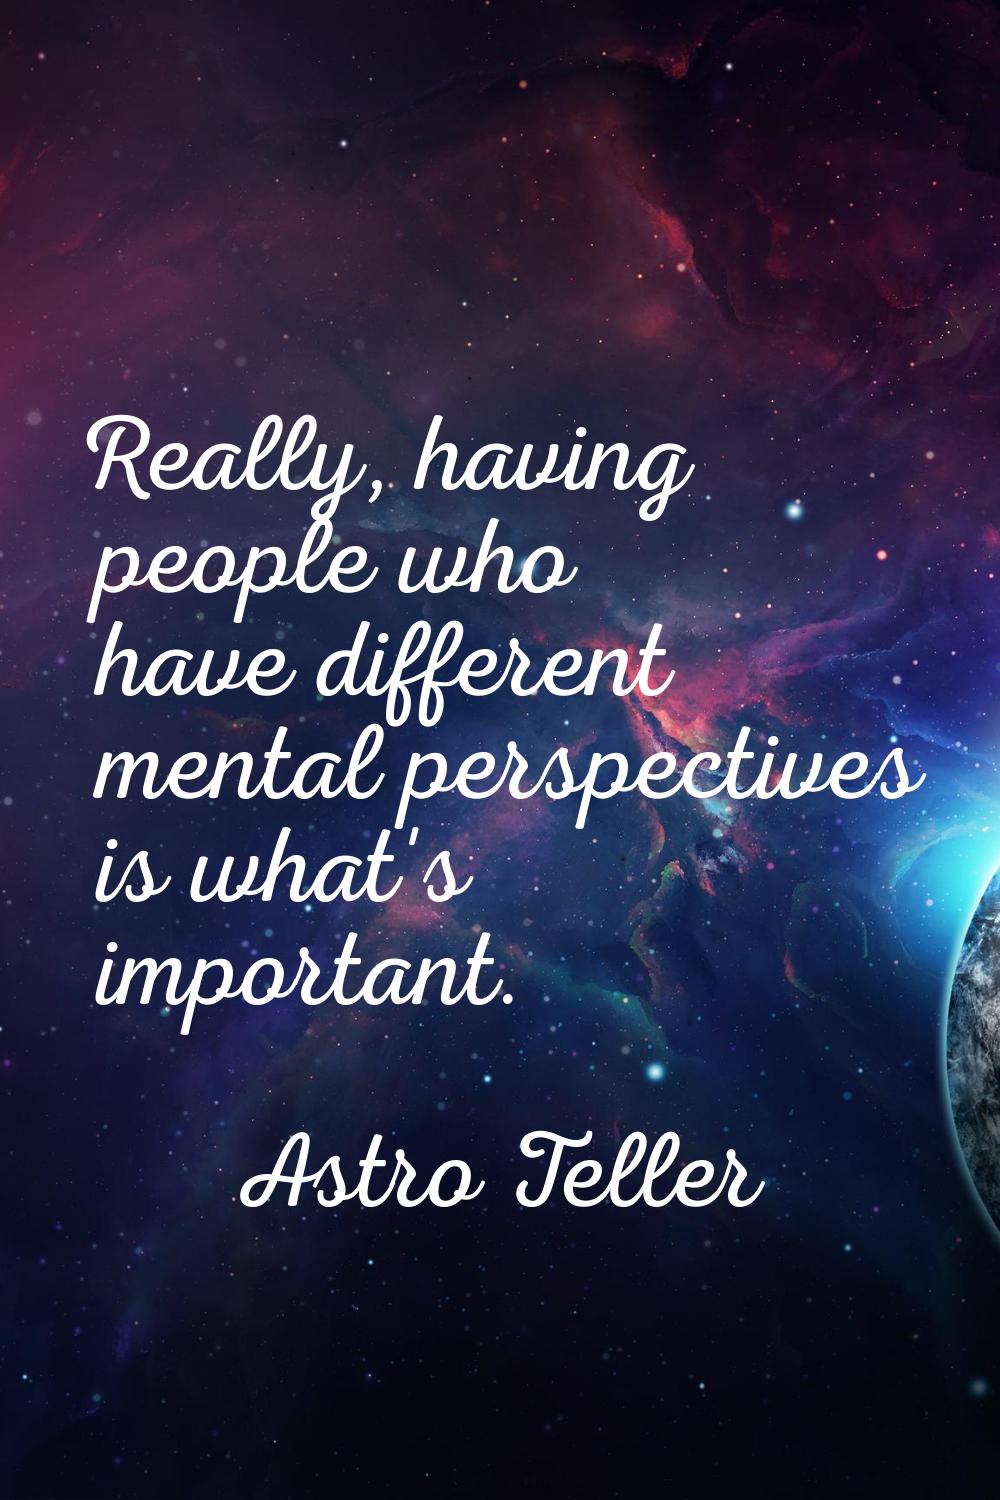 Really, having people who have different mental perspectives is what's important.